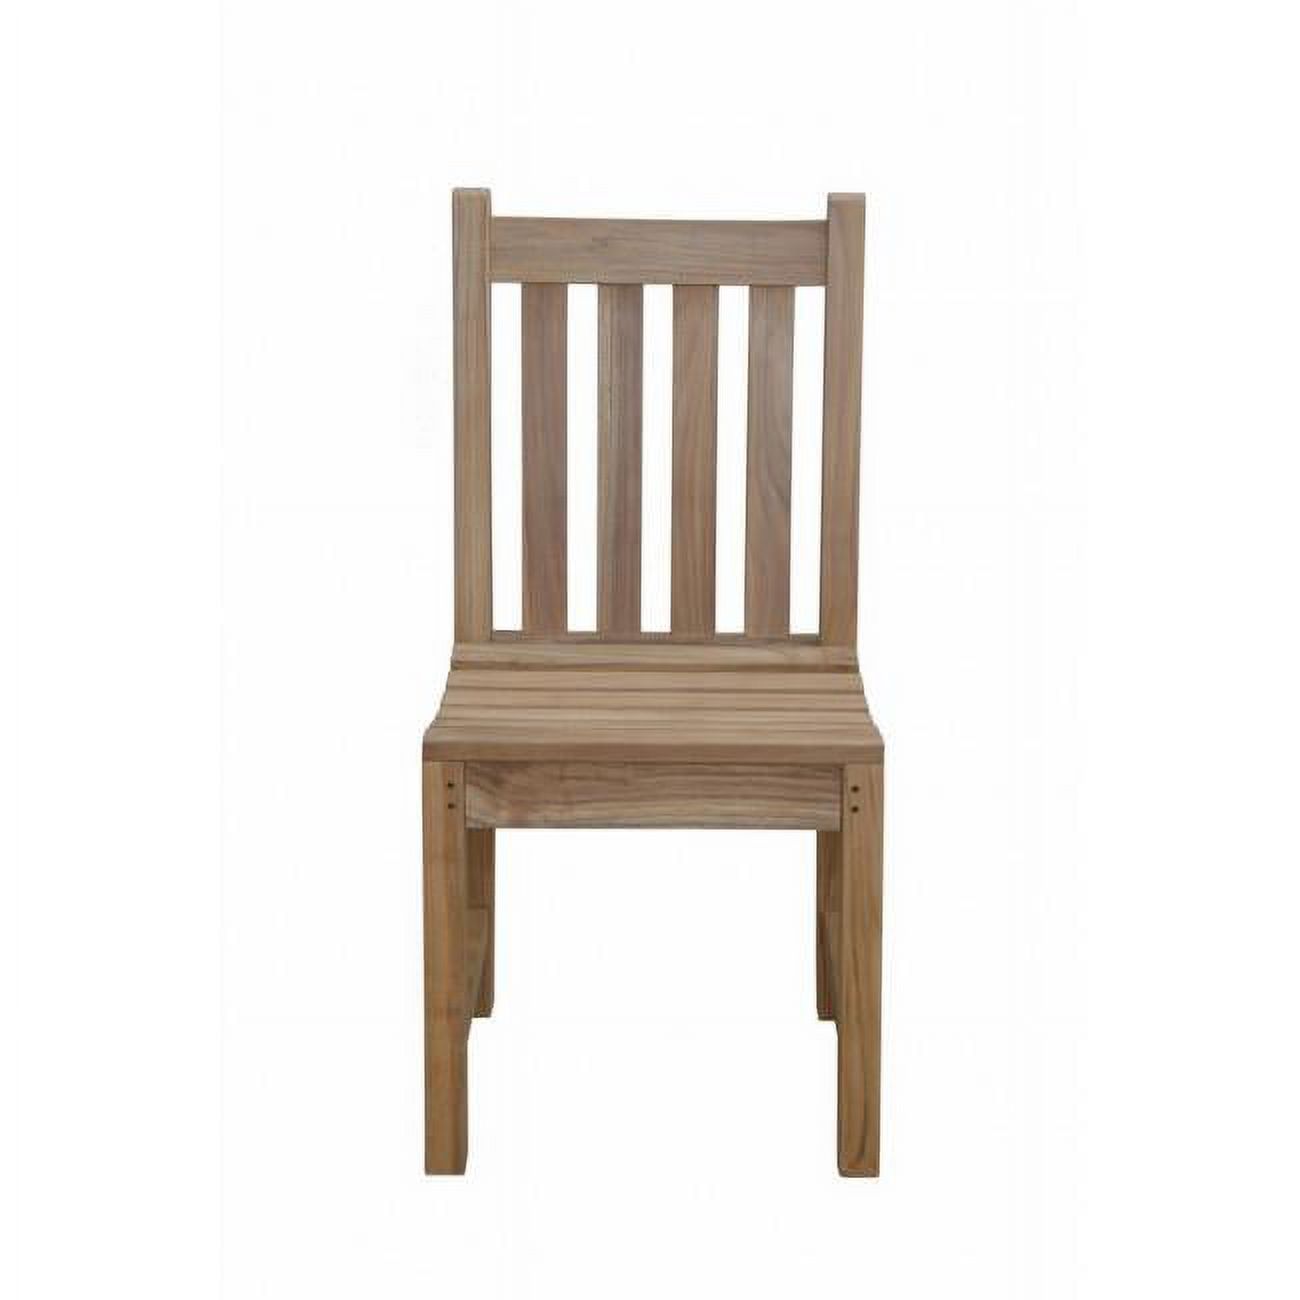 Anderson Teak Braxton Dining Chair - image 1 of 2